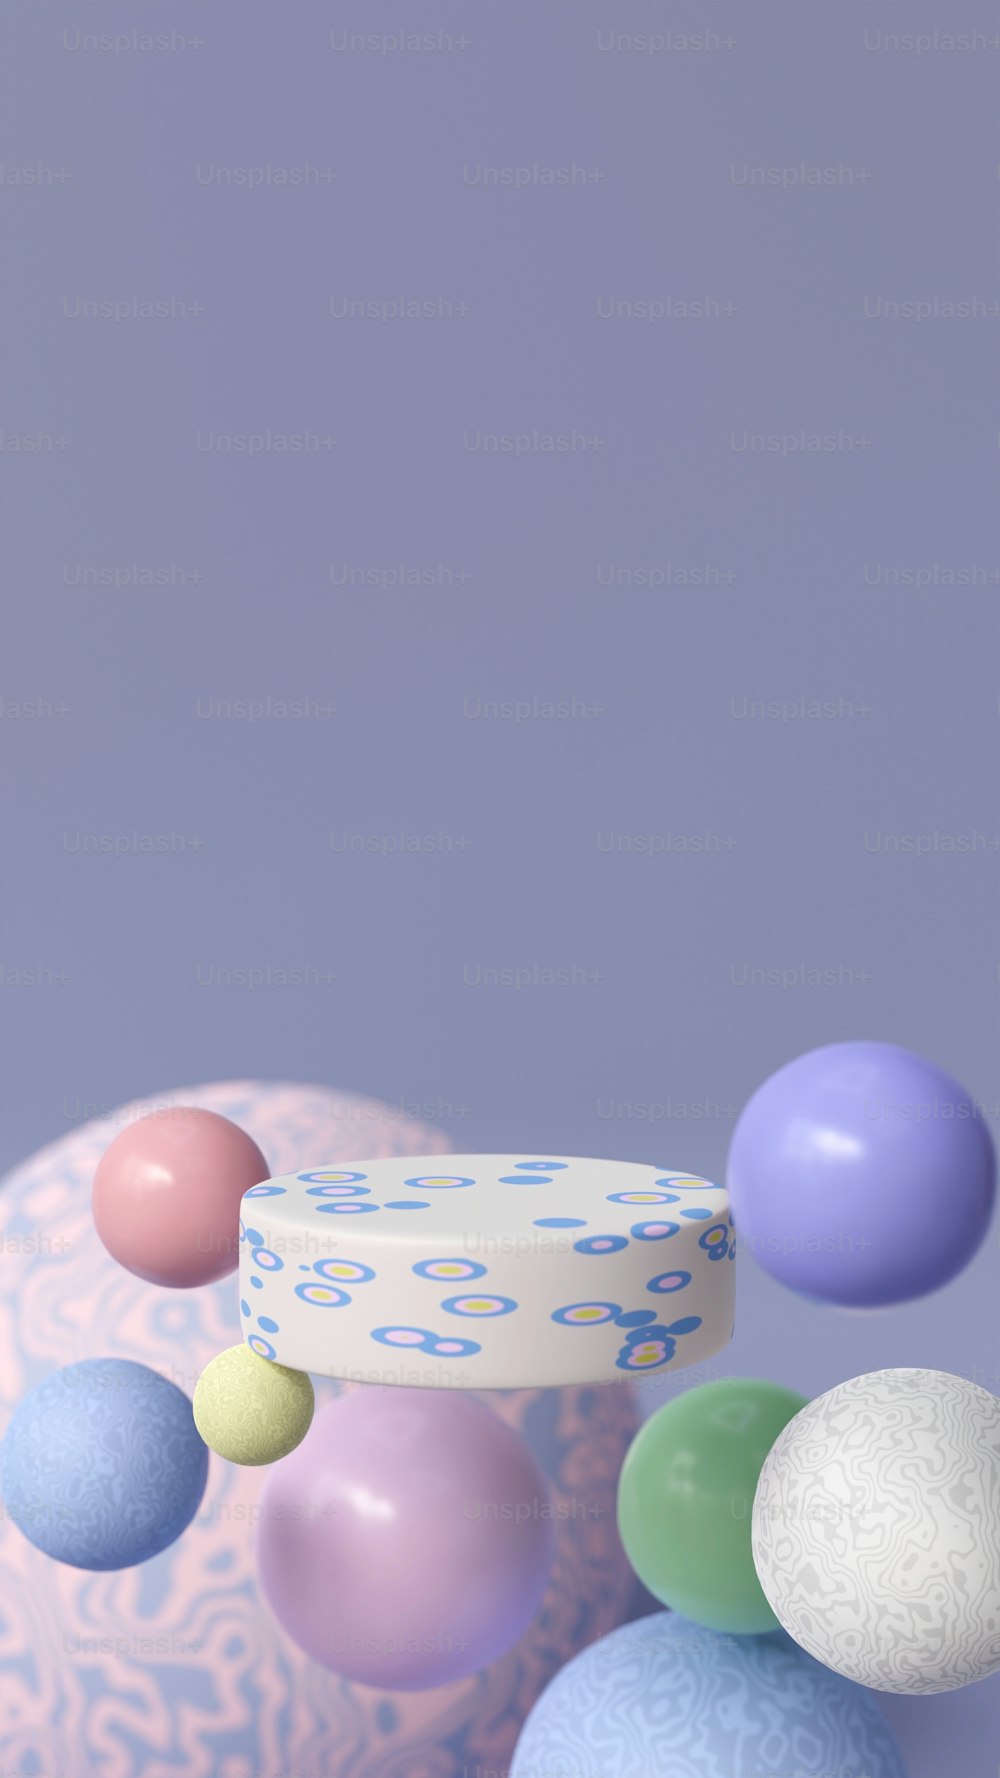 a cake sitting on top of a table surrounded by balloons